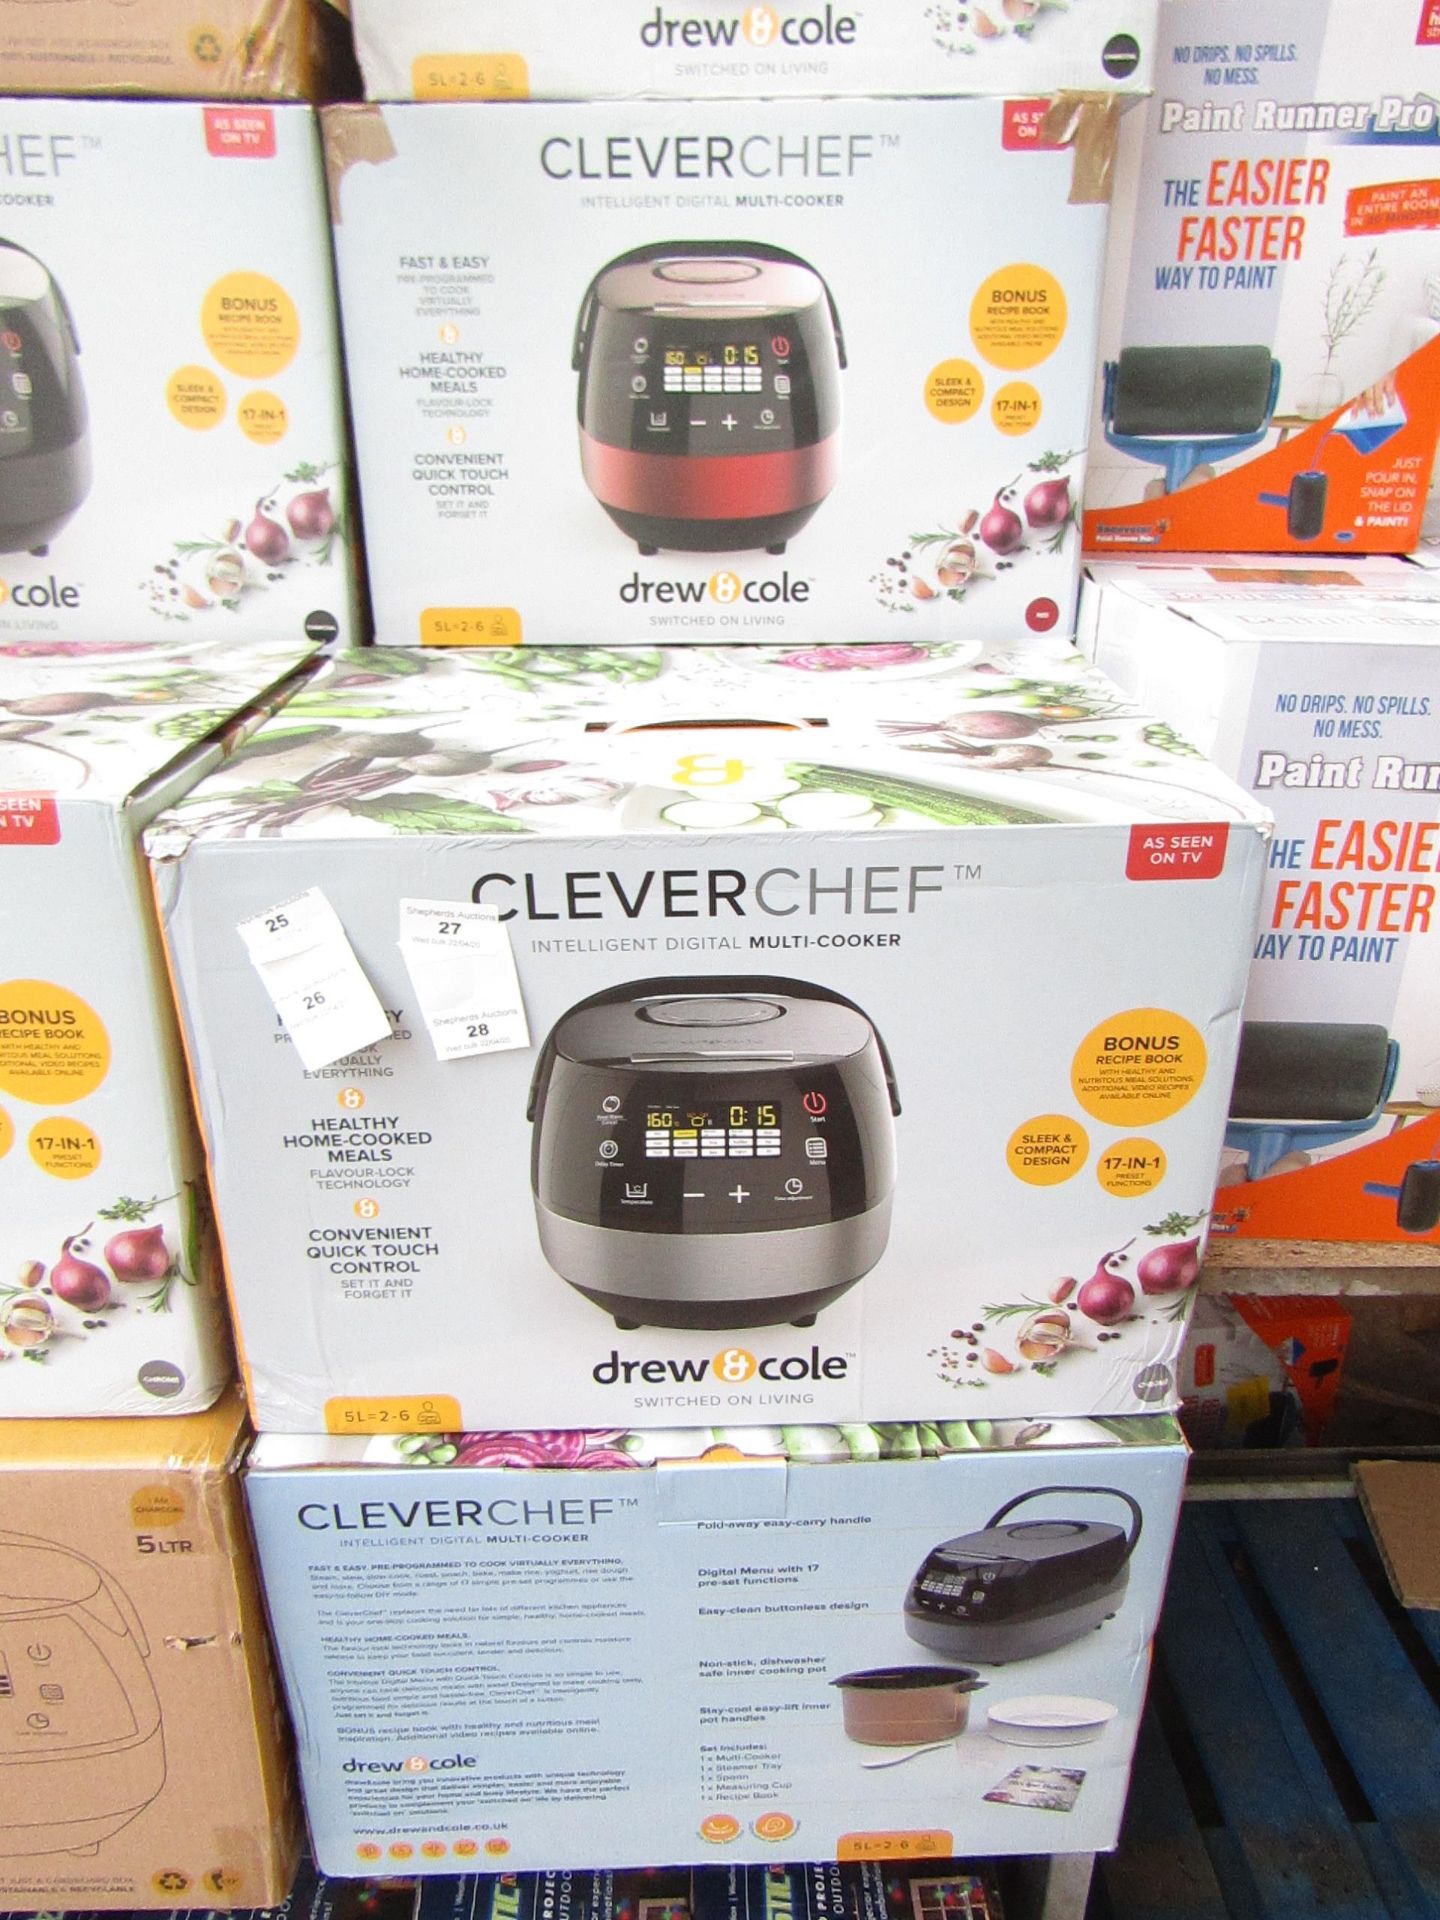 | 5x | DREW&COLE CLEVERCHEF | UNCHECKED AND BOXED | NO ONLINE RE-SALE | SKU C5060541511682 | RRP £